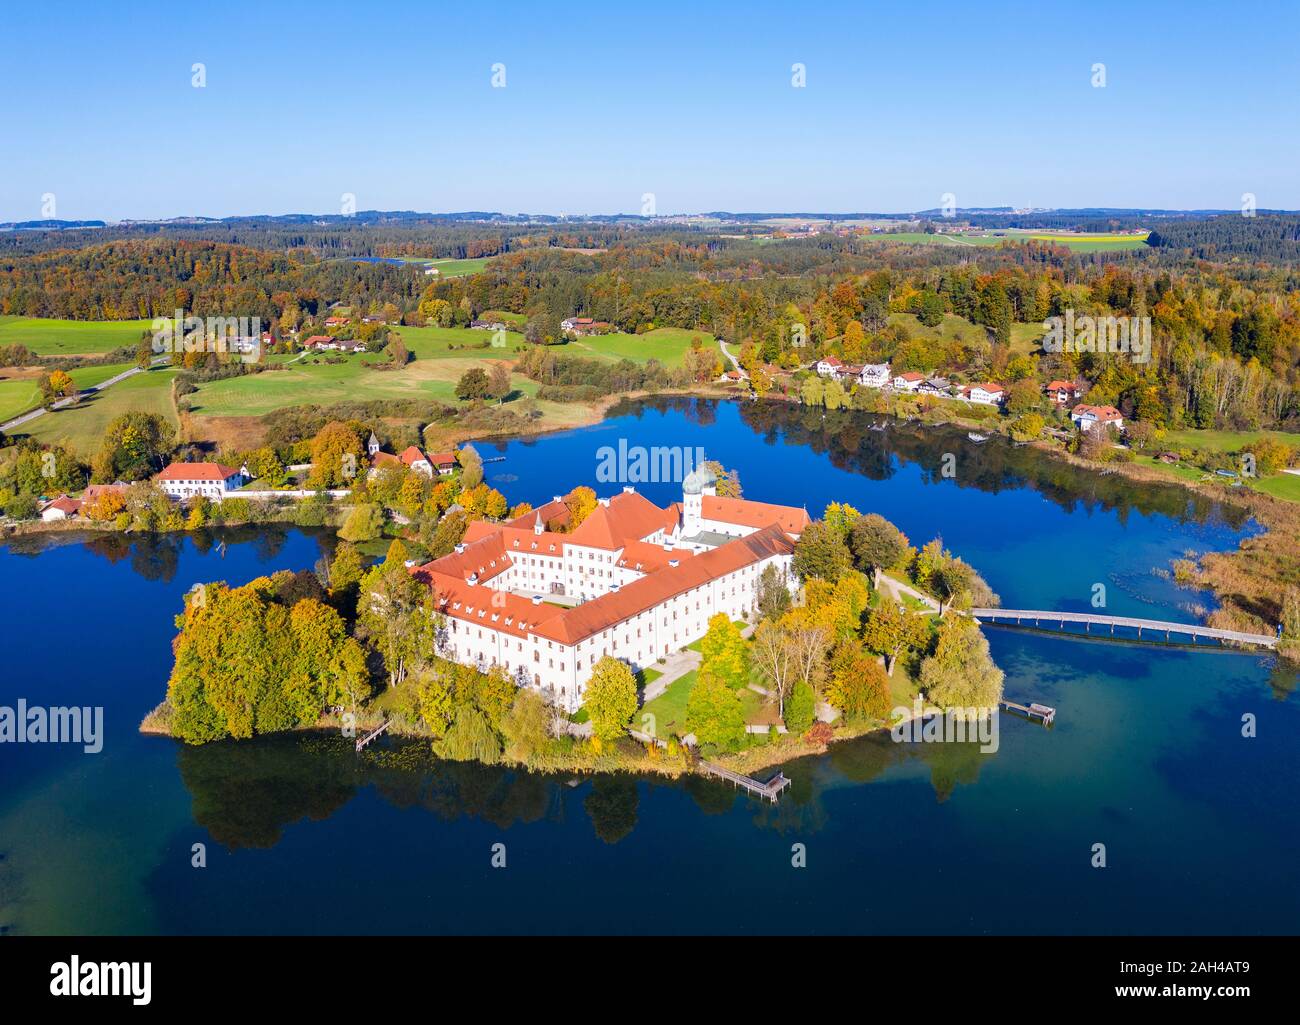 Germany, Bavaria, Seeon-Seebruck, Aerial view of Klostersee lake and Seeon Abbey Stock Photo